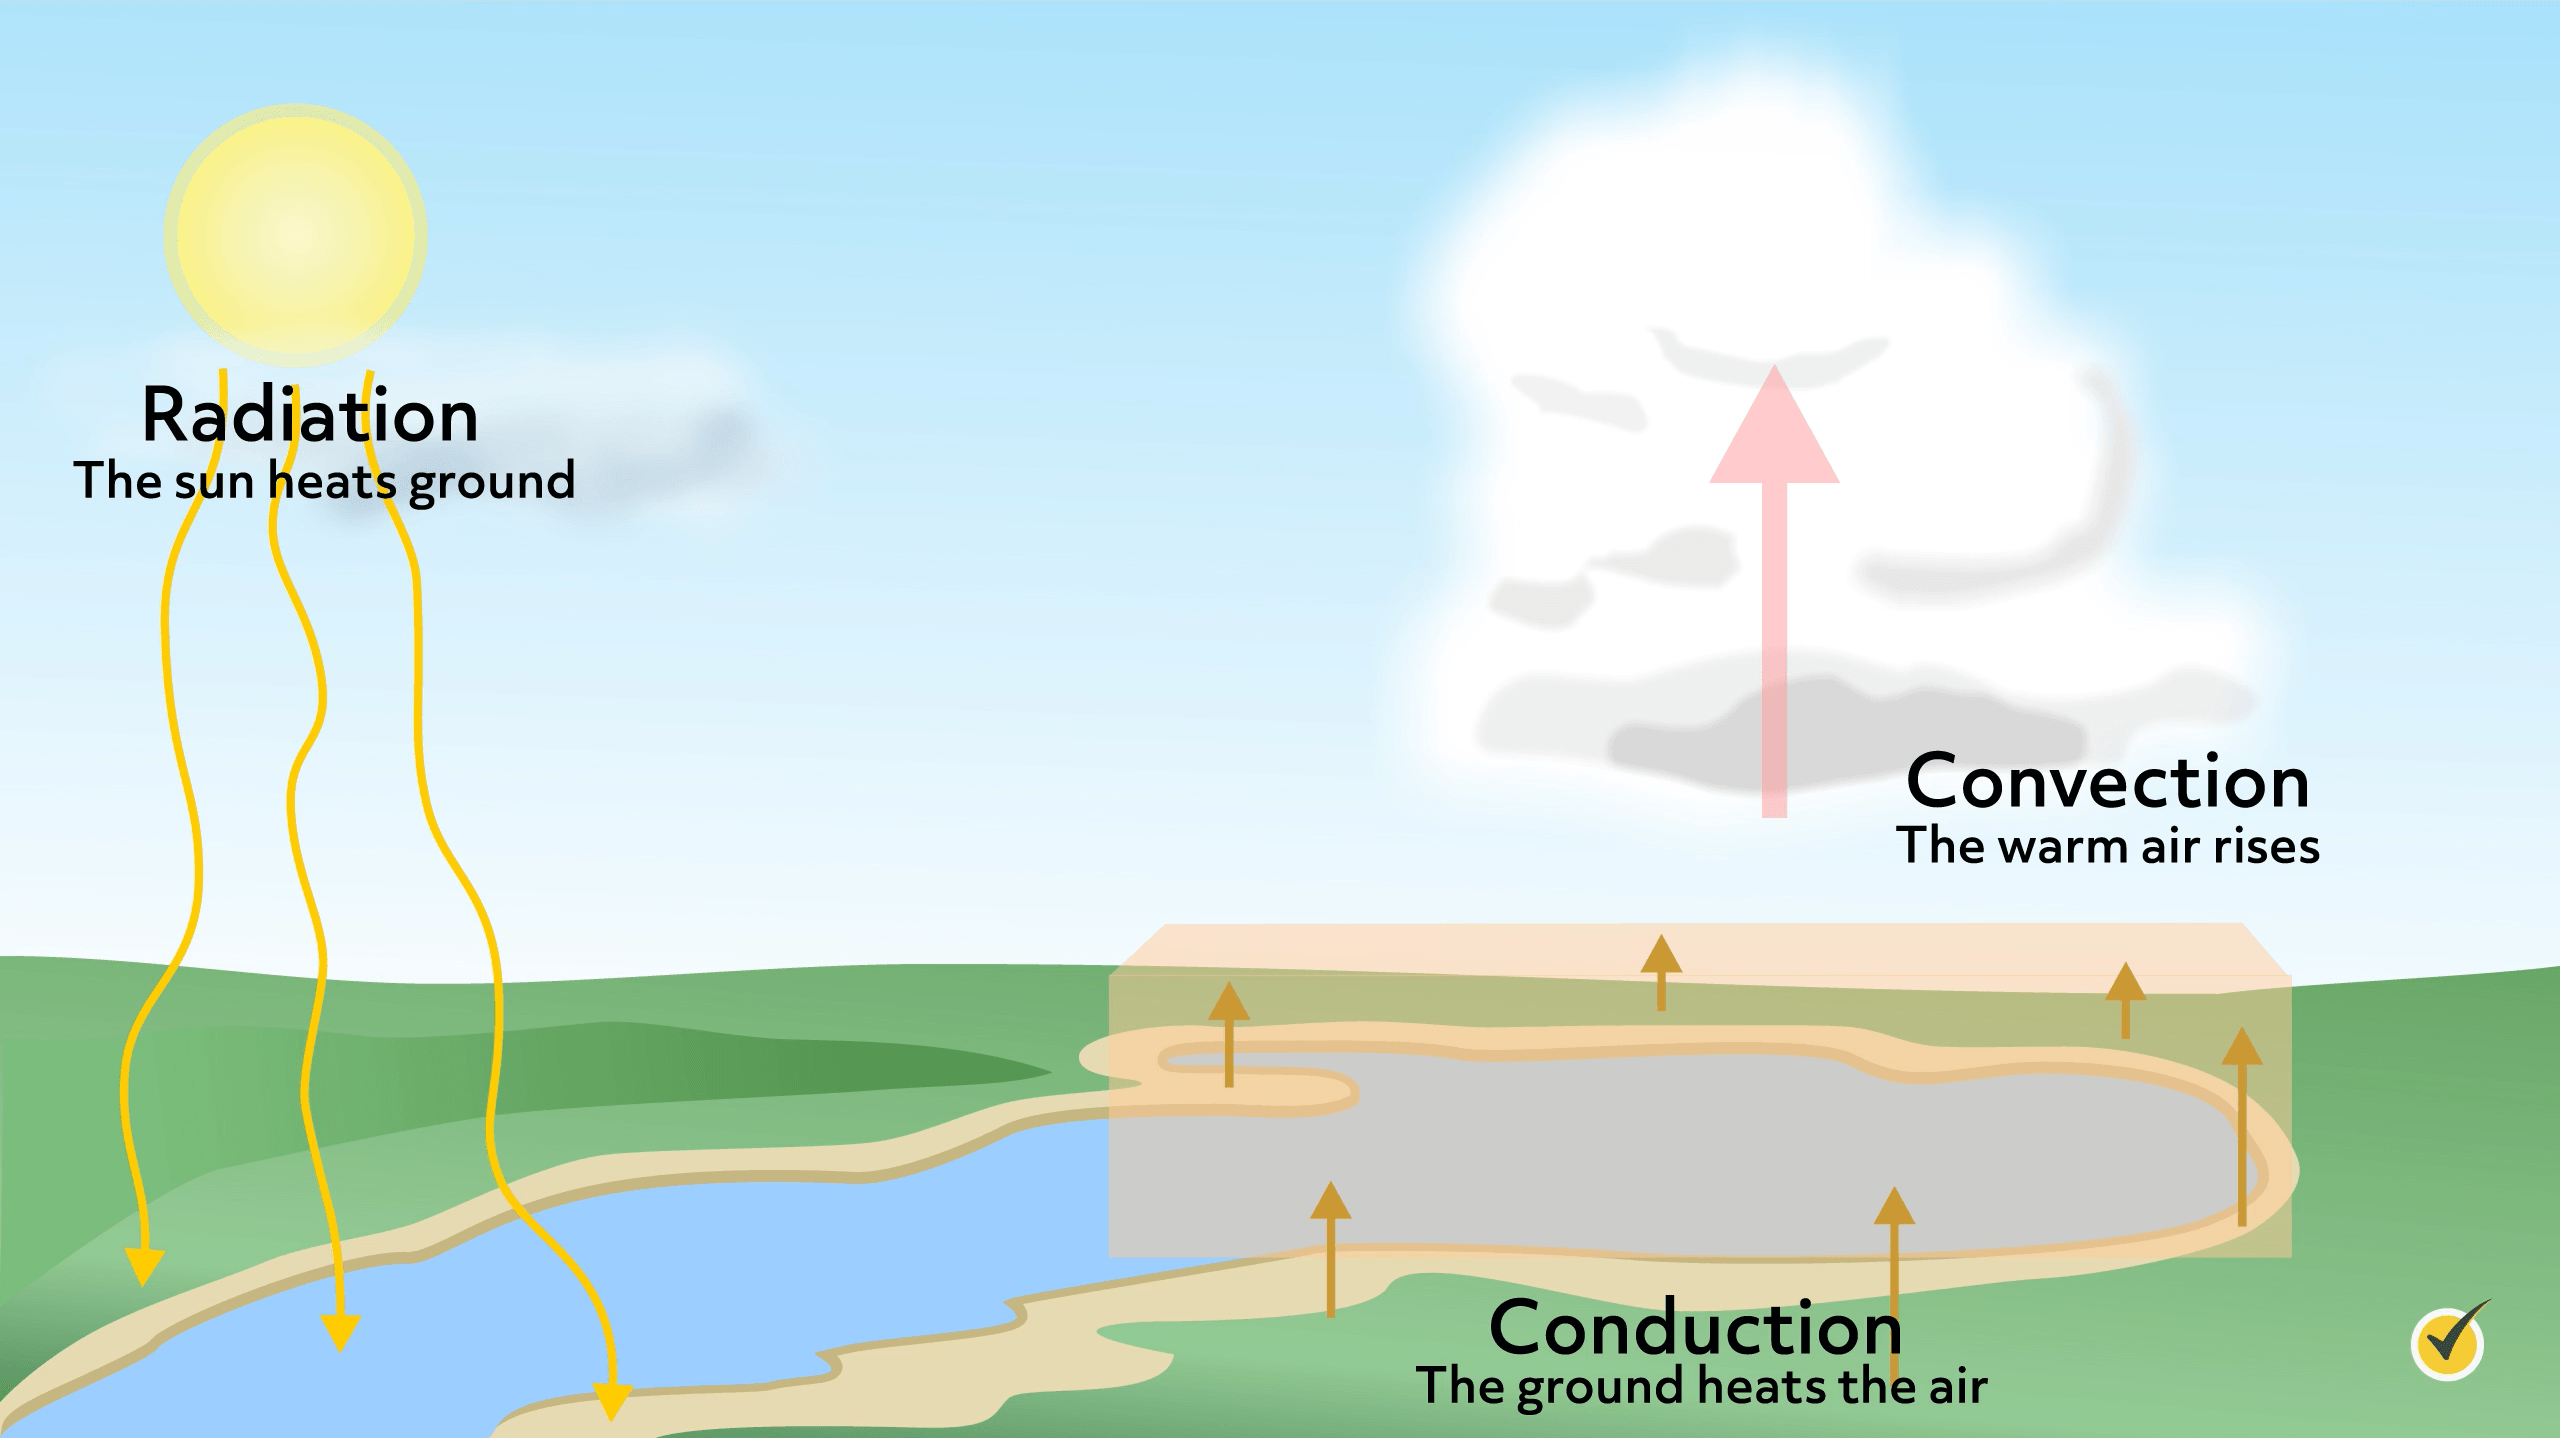 Image of the sun heating the ground (radiation), the ground heating the air (conduction), and the warm air rising (convection). 